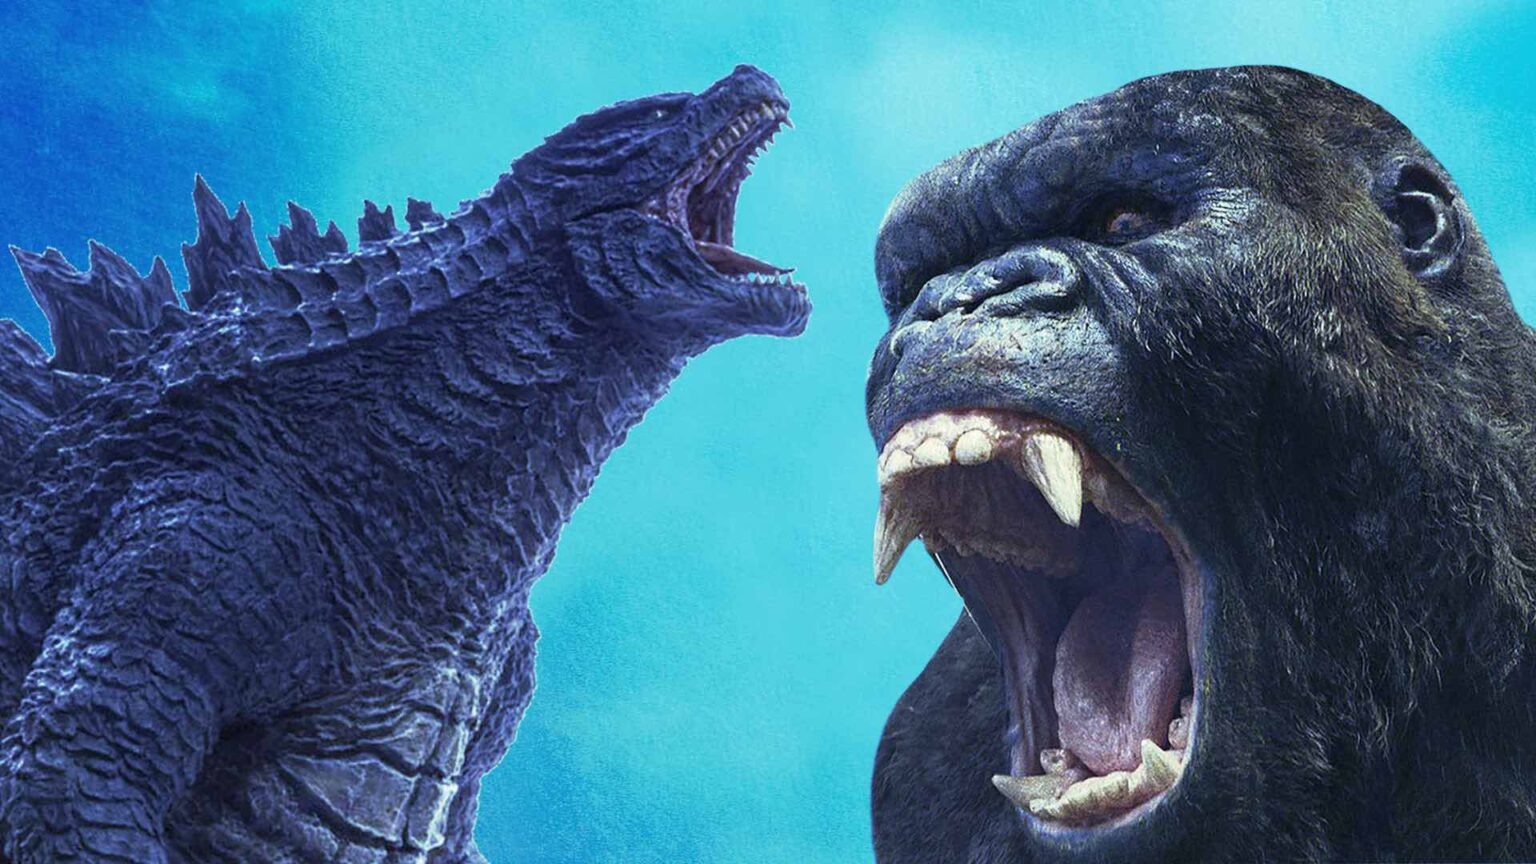 How will the leak about 'Godzilla vs. Kong' affect the movie industry? Peek inside the tense negotiations between studio execs and filmmakers.